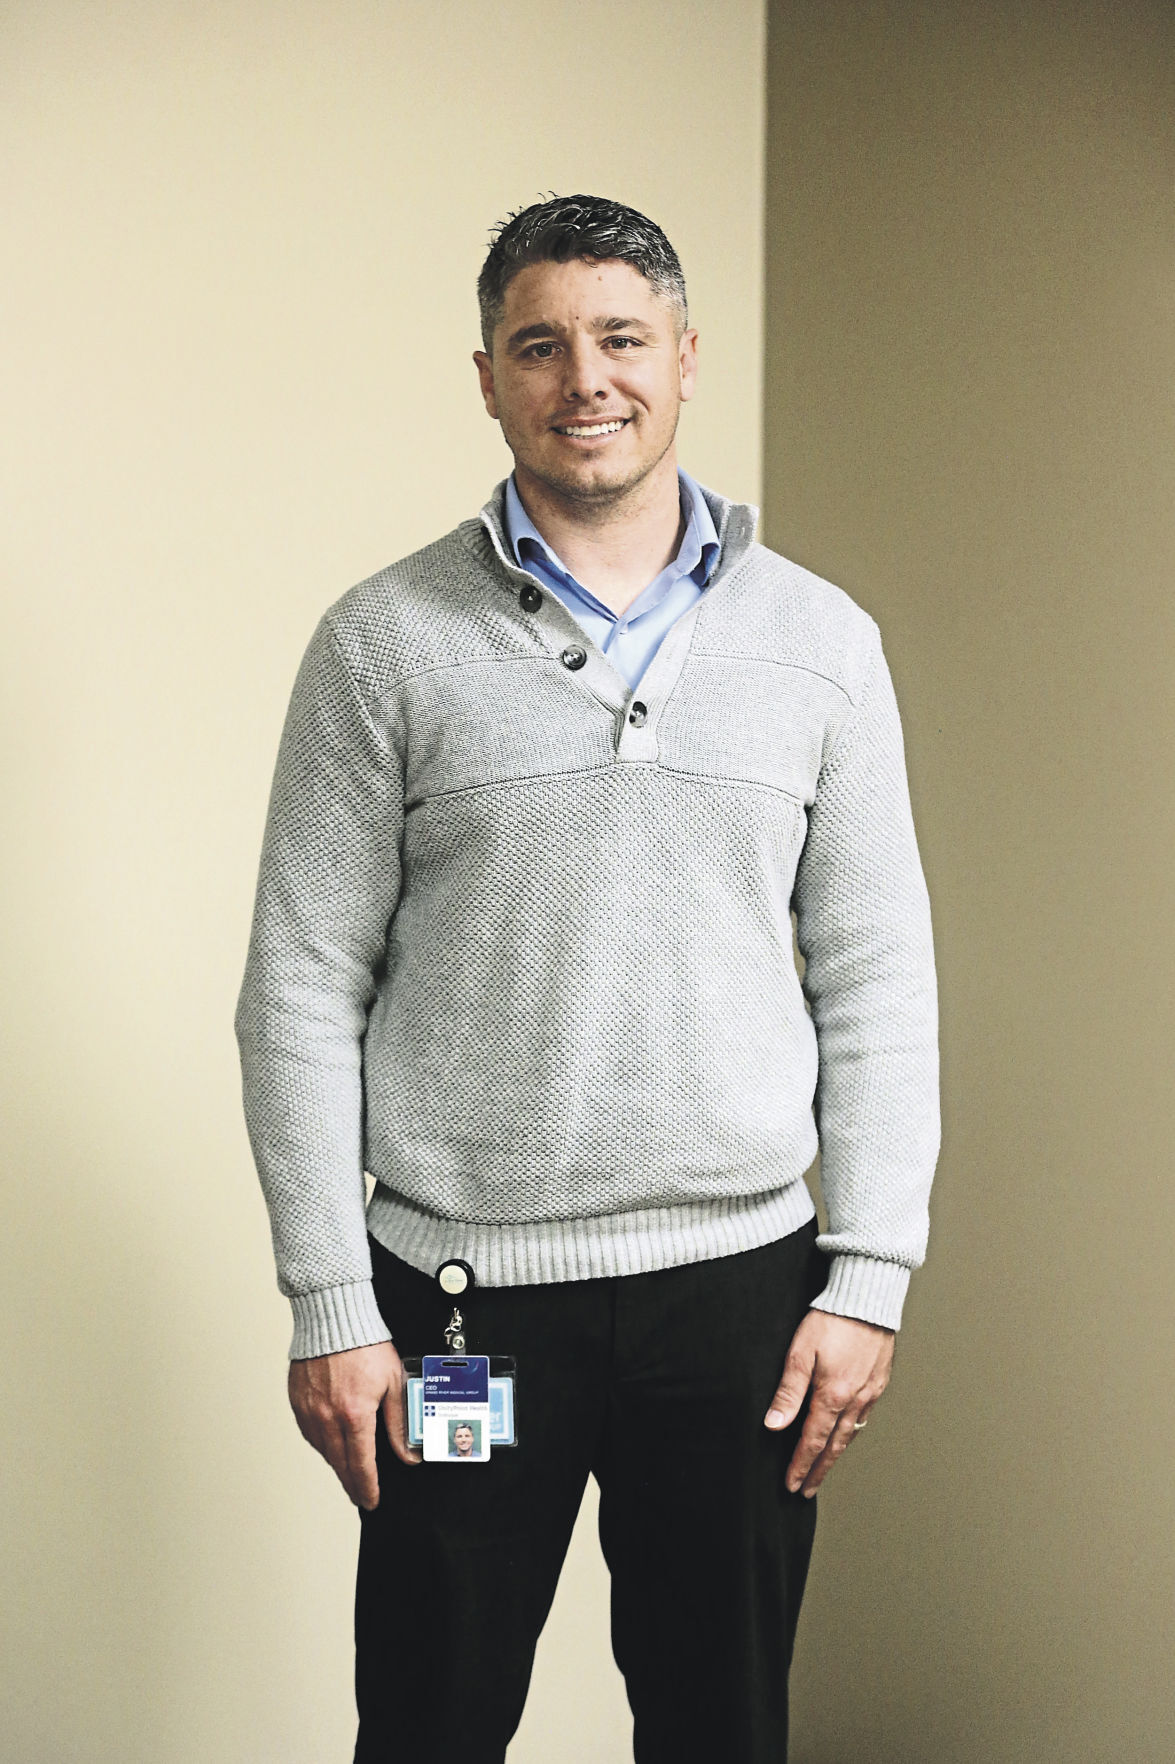 Justin Hafner is CEO of Grand River Medical Group in Dubuque. PHOTO CREDIT: Jessica Reilly